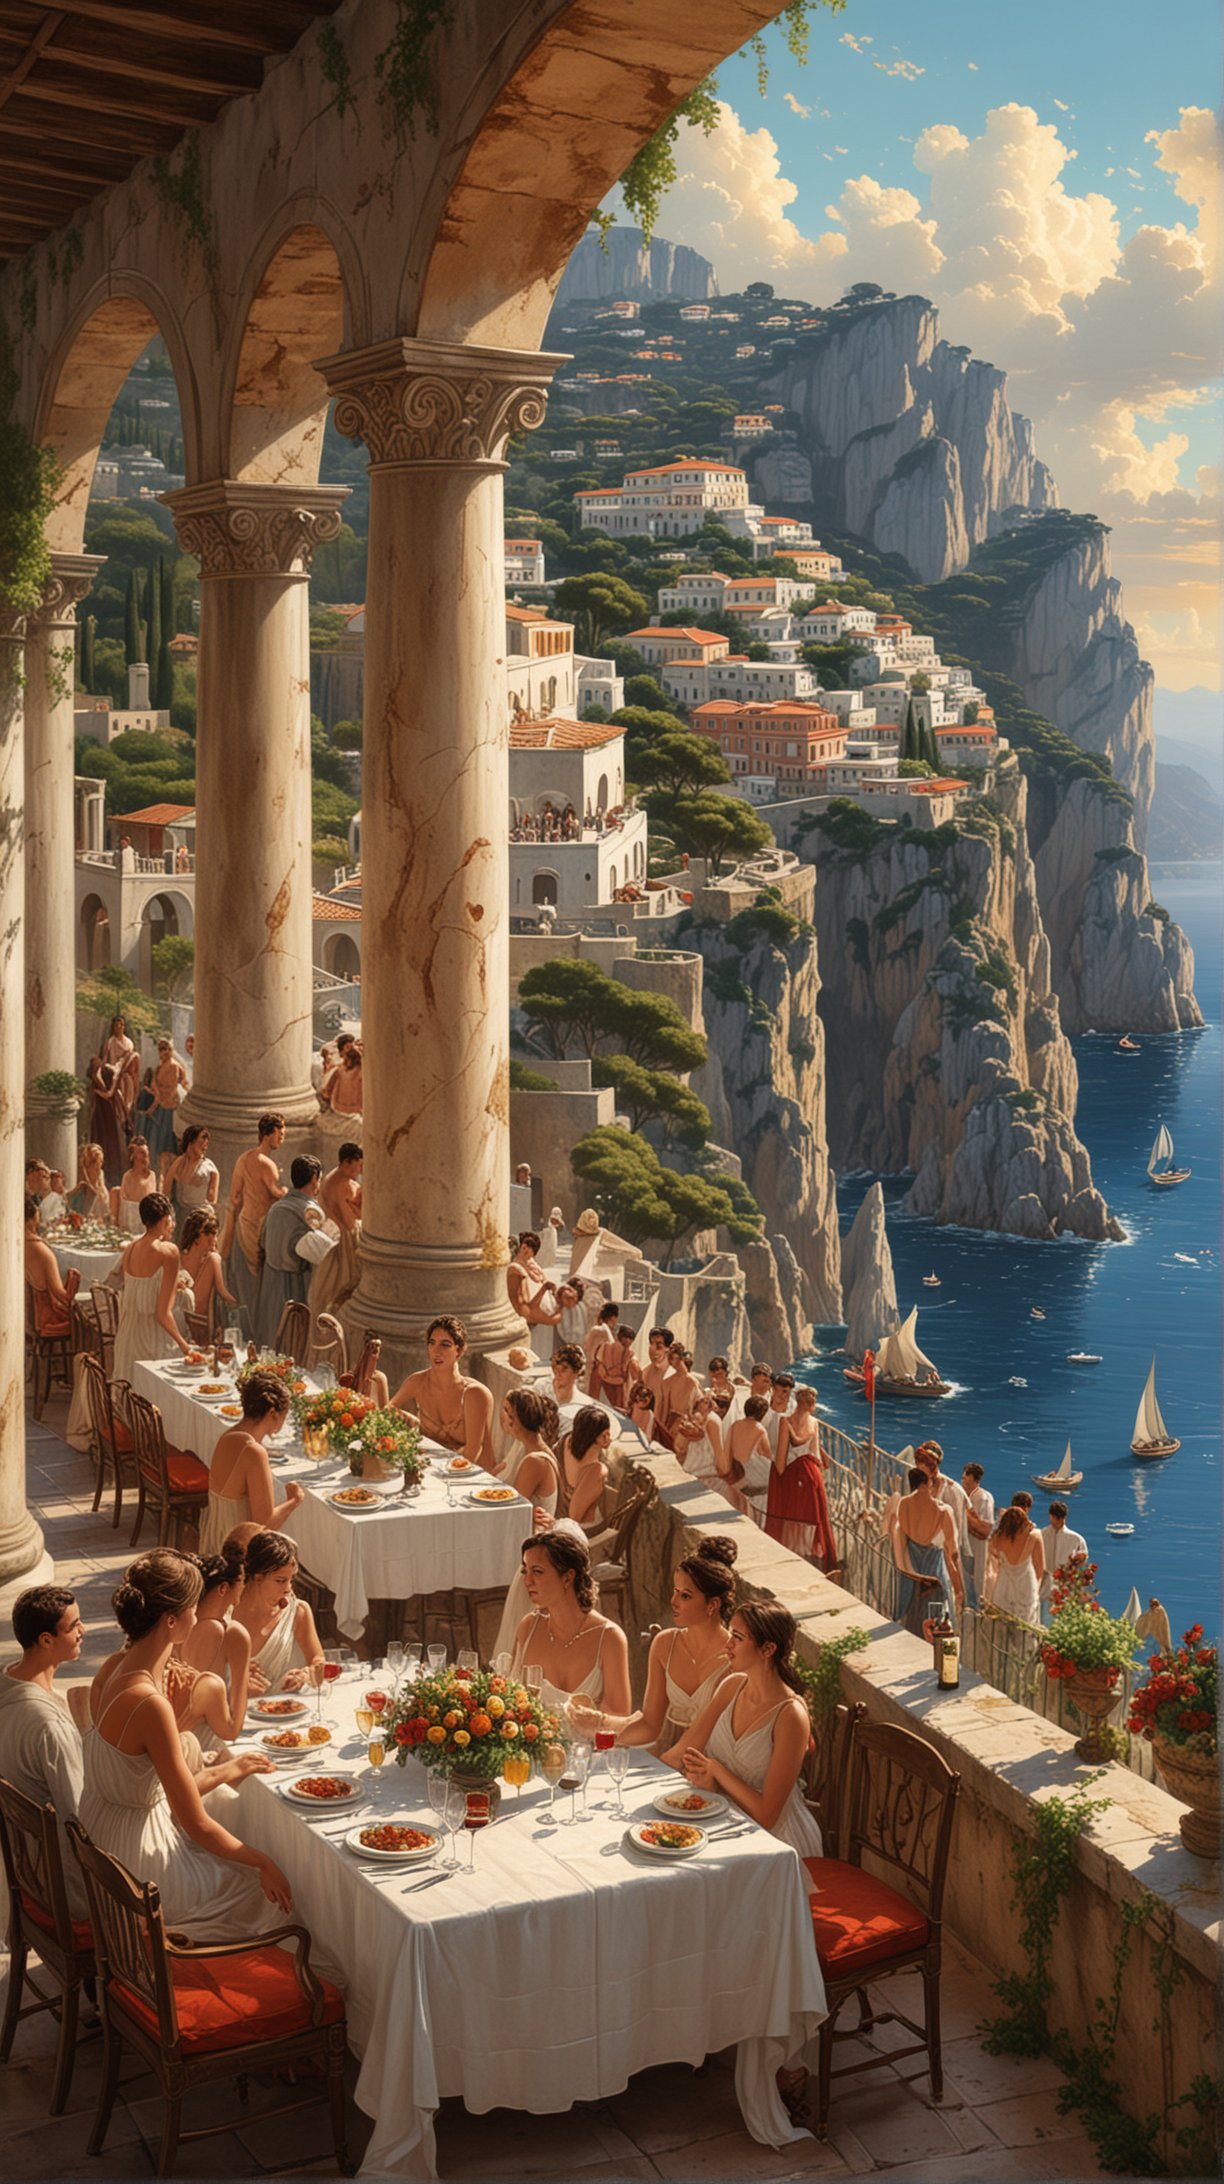 Depict an ancient Roman villa on the island of Capri during Emperor Tiberius' reign, showcasing a debauched party scene with orgies and wine-soaked feasts. The setting should be a luxurious villa with Roman architecture, overlooking the sea. The composition should be wide-angle to capture the grandeur of the party, including various groups of people in Roman attire, engaged in different activities. The lighting should mimic torchlight or natural sunlight, highlighting the decadence and opulence of the scene. Include details like goblets, lavish food, and the scenic background of Capri to enhance the historical realism.